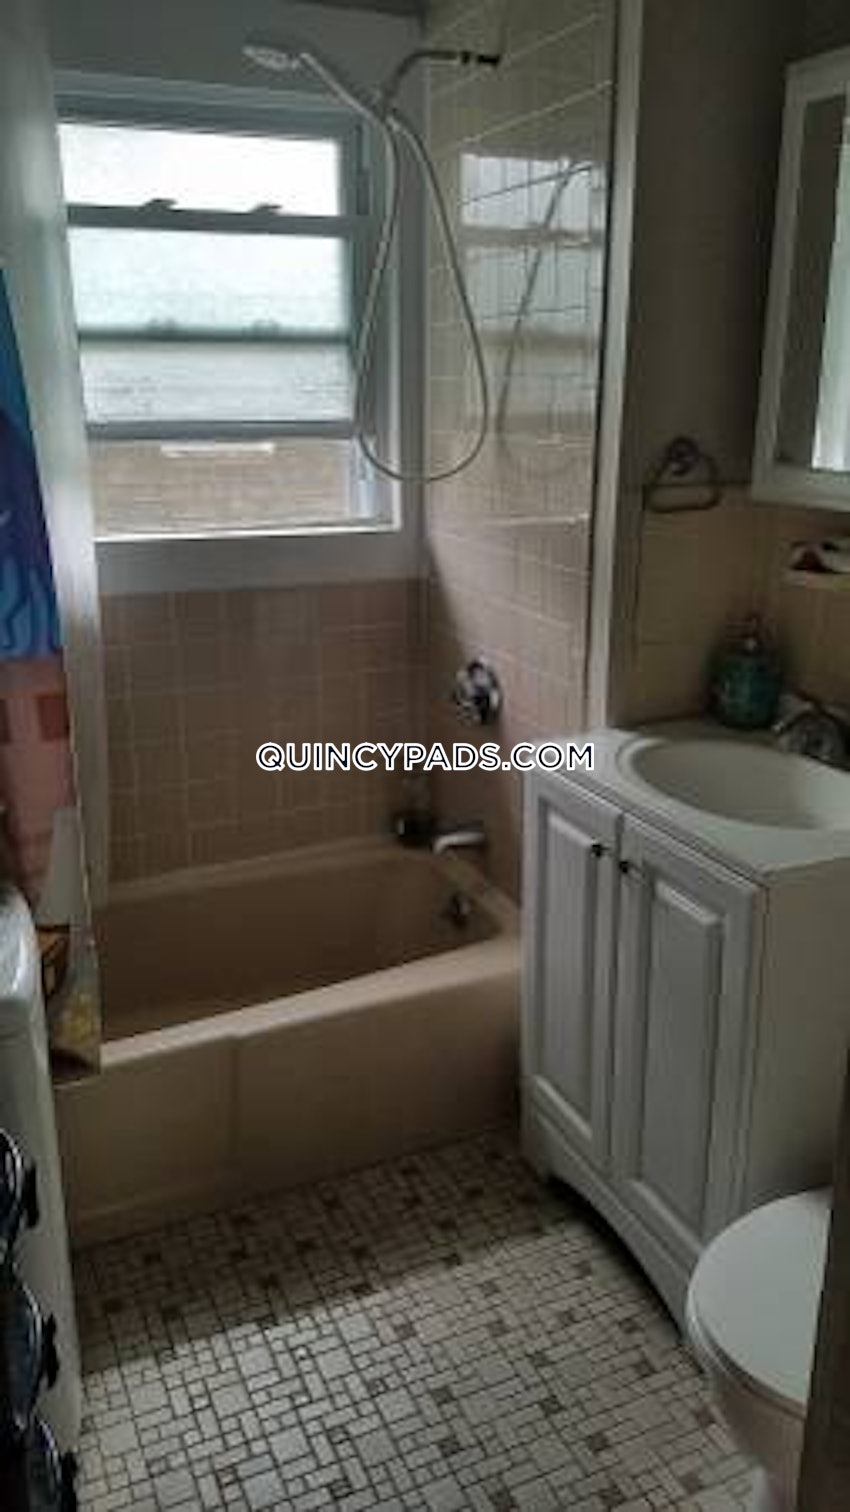 QUINCY - WOLLASTON - 2 Beds, 1 Bath - Image 4